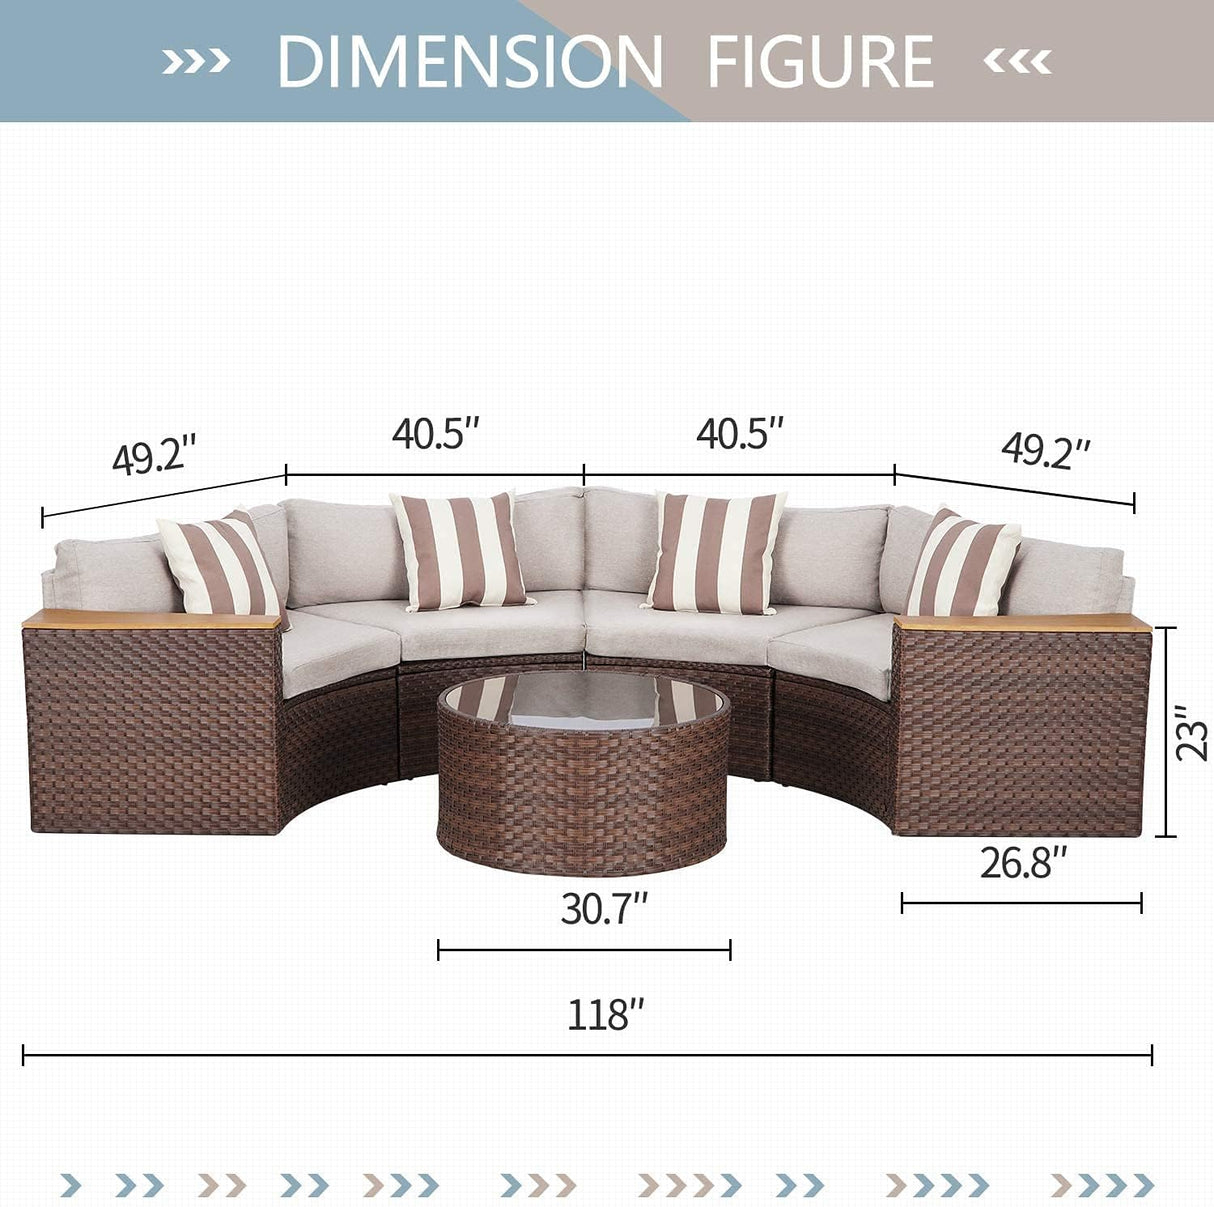 5-Piece Outdoor Sectional Sofa Half-Moon Patio Conversation Set All Weather Brown Wicker Sectional Couch with round Tempered Glass Table and Beige Cushions